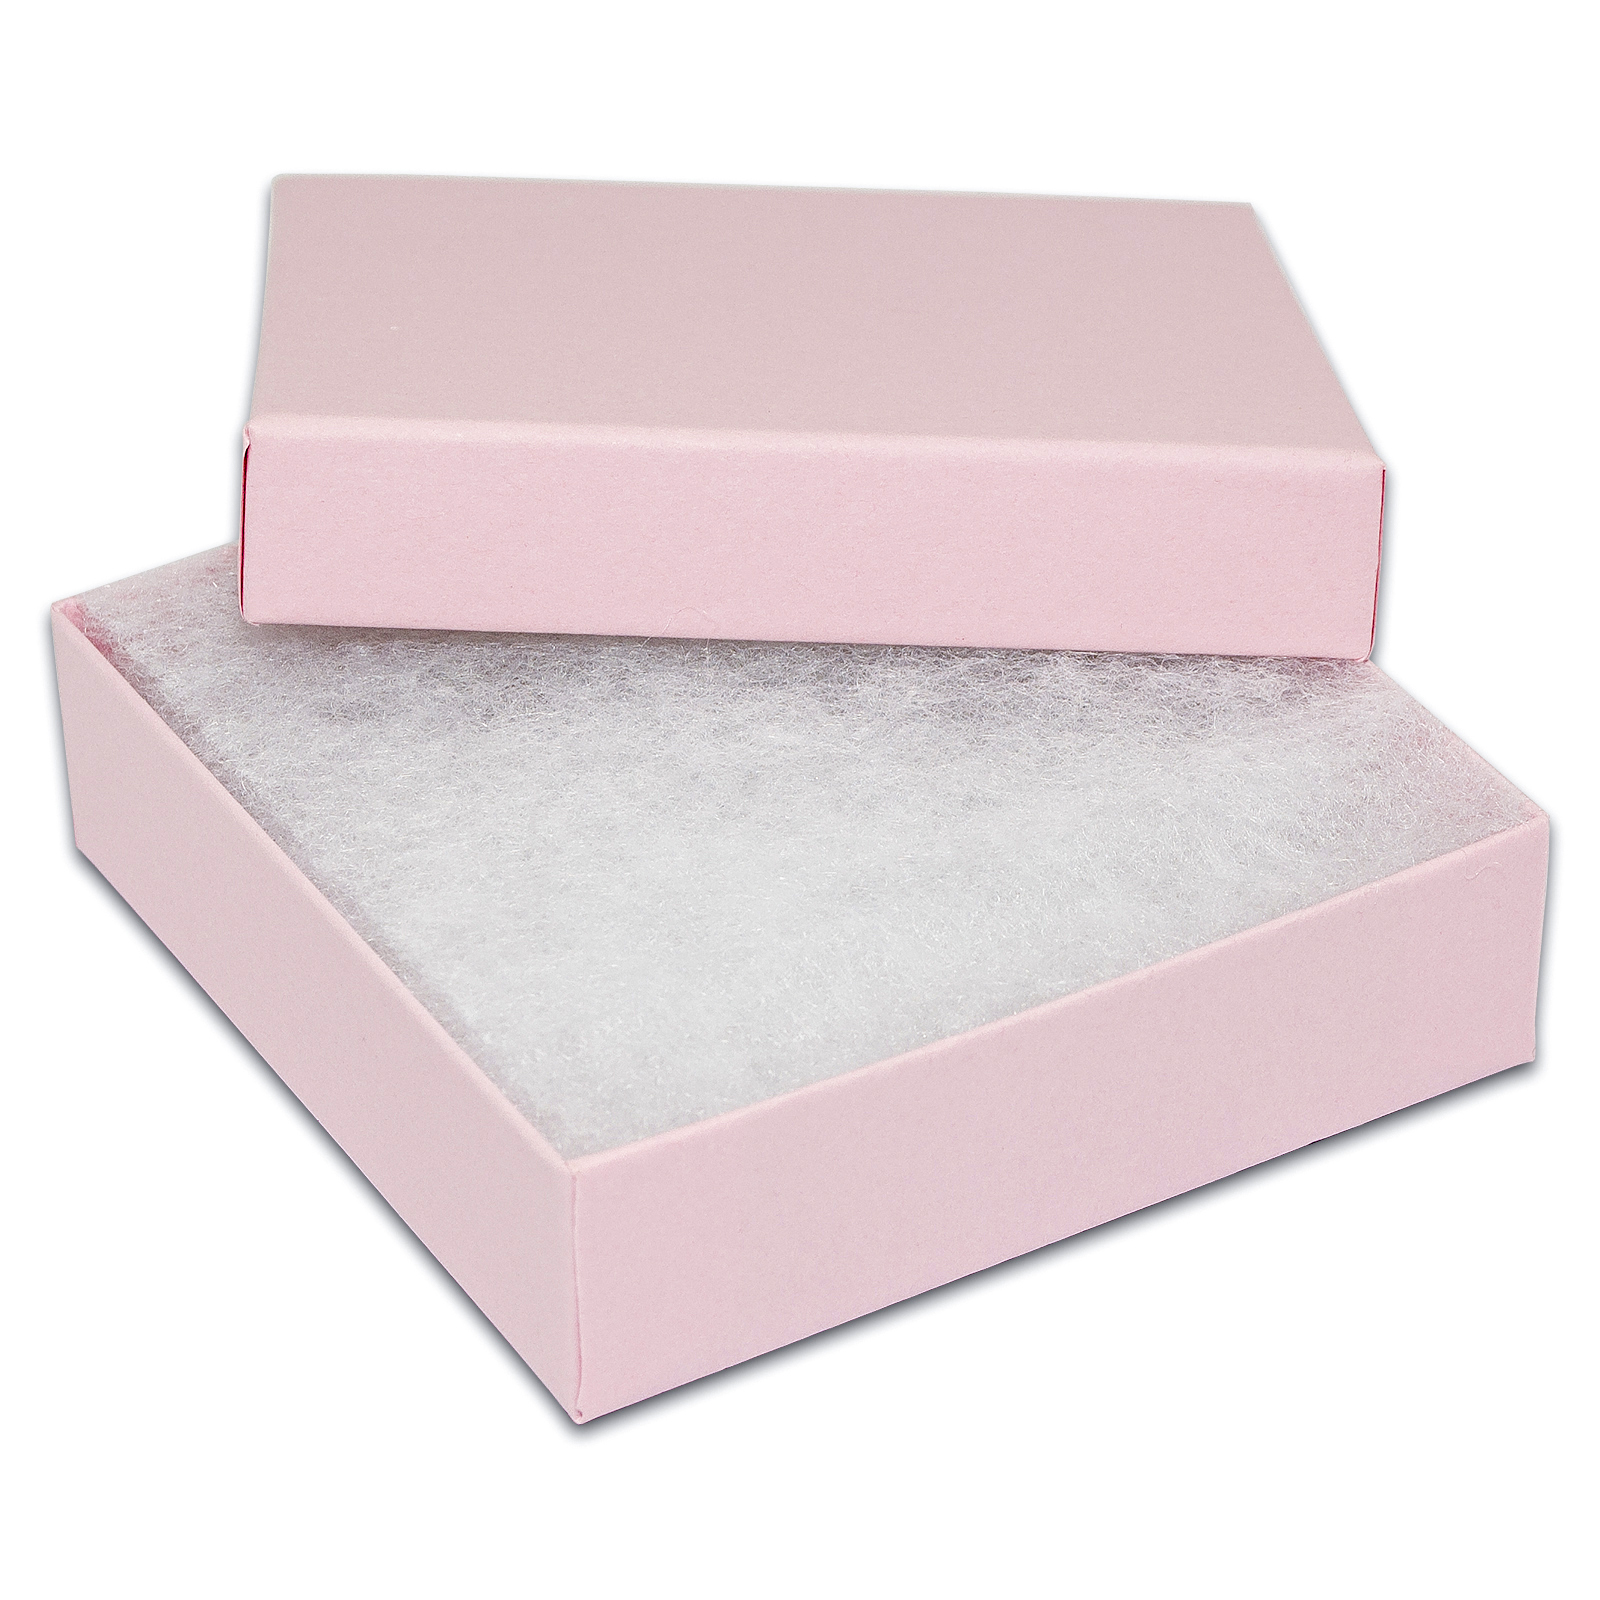 Cotton Fill Jewelry Boxes